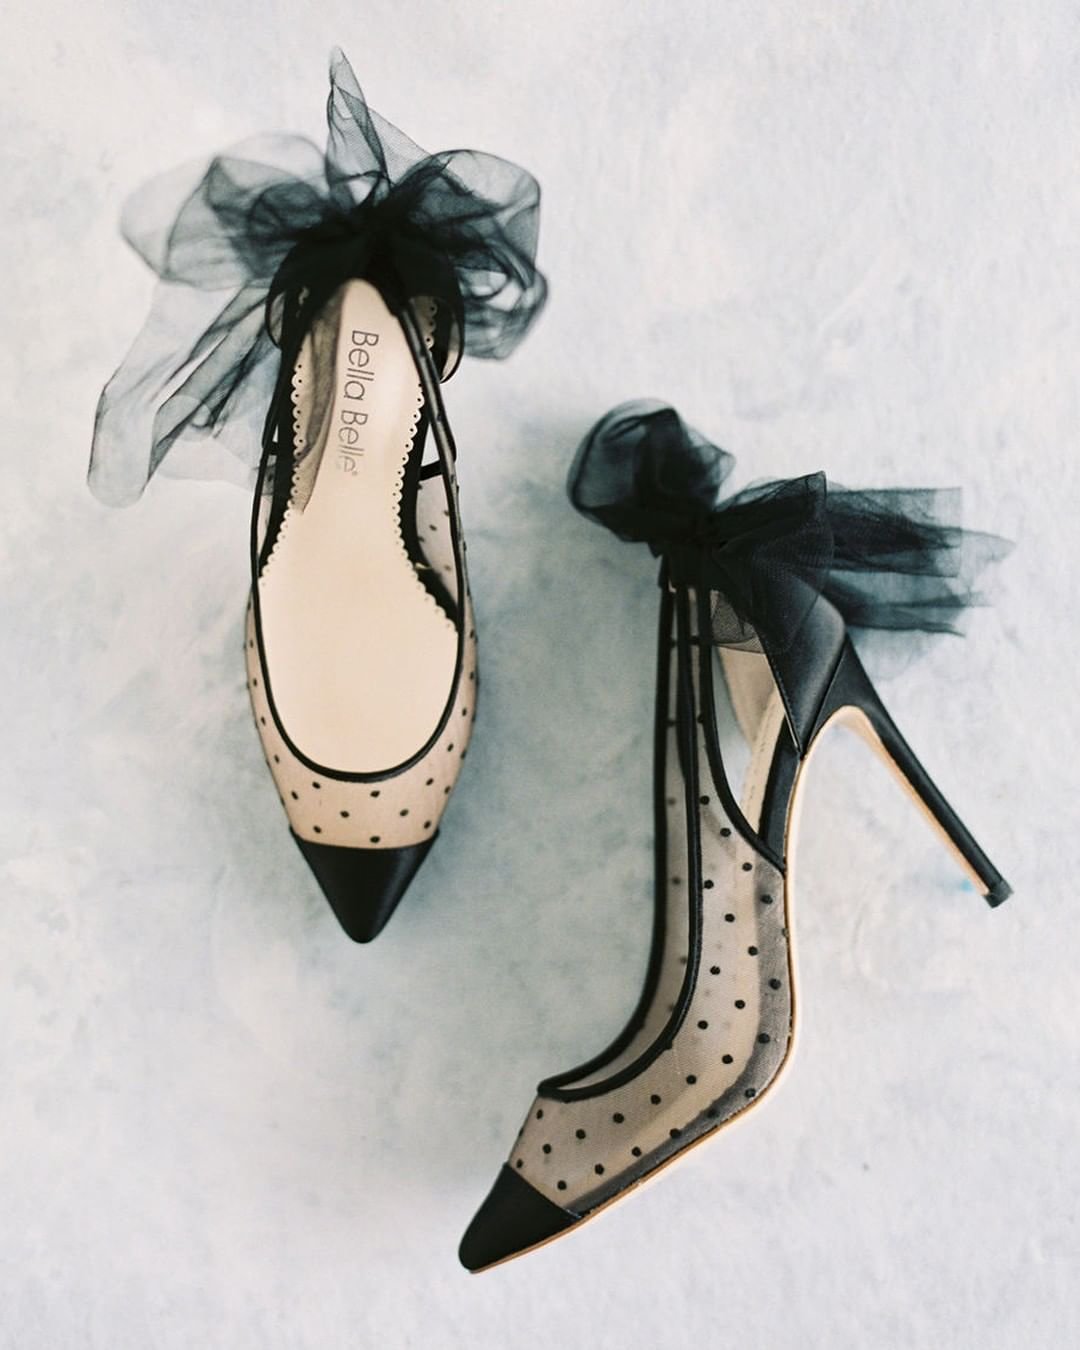 black shoes for wedding heels with little veil bows polkadot bellabelleshoes